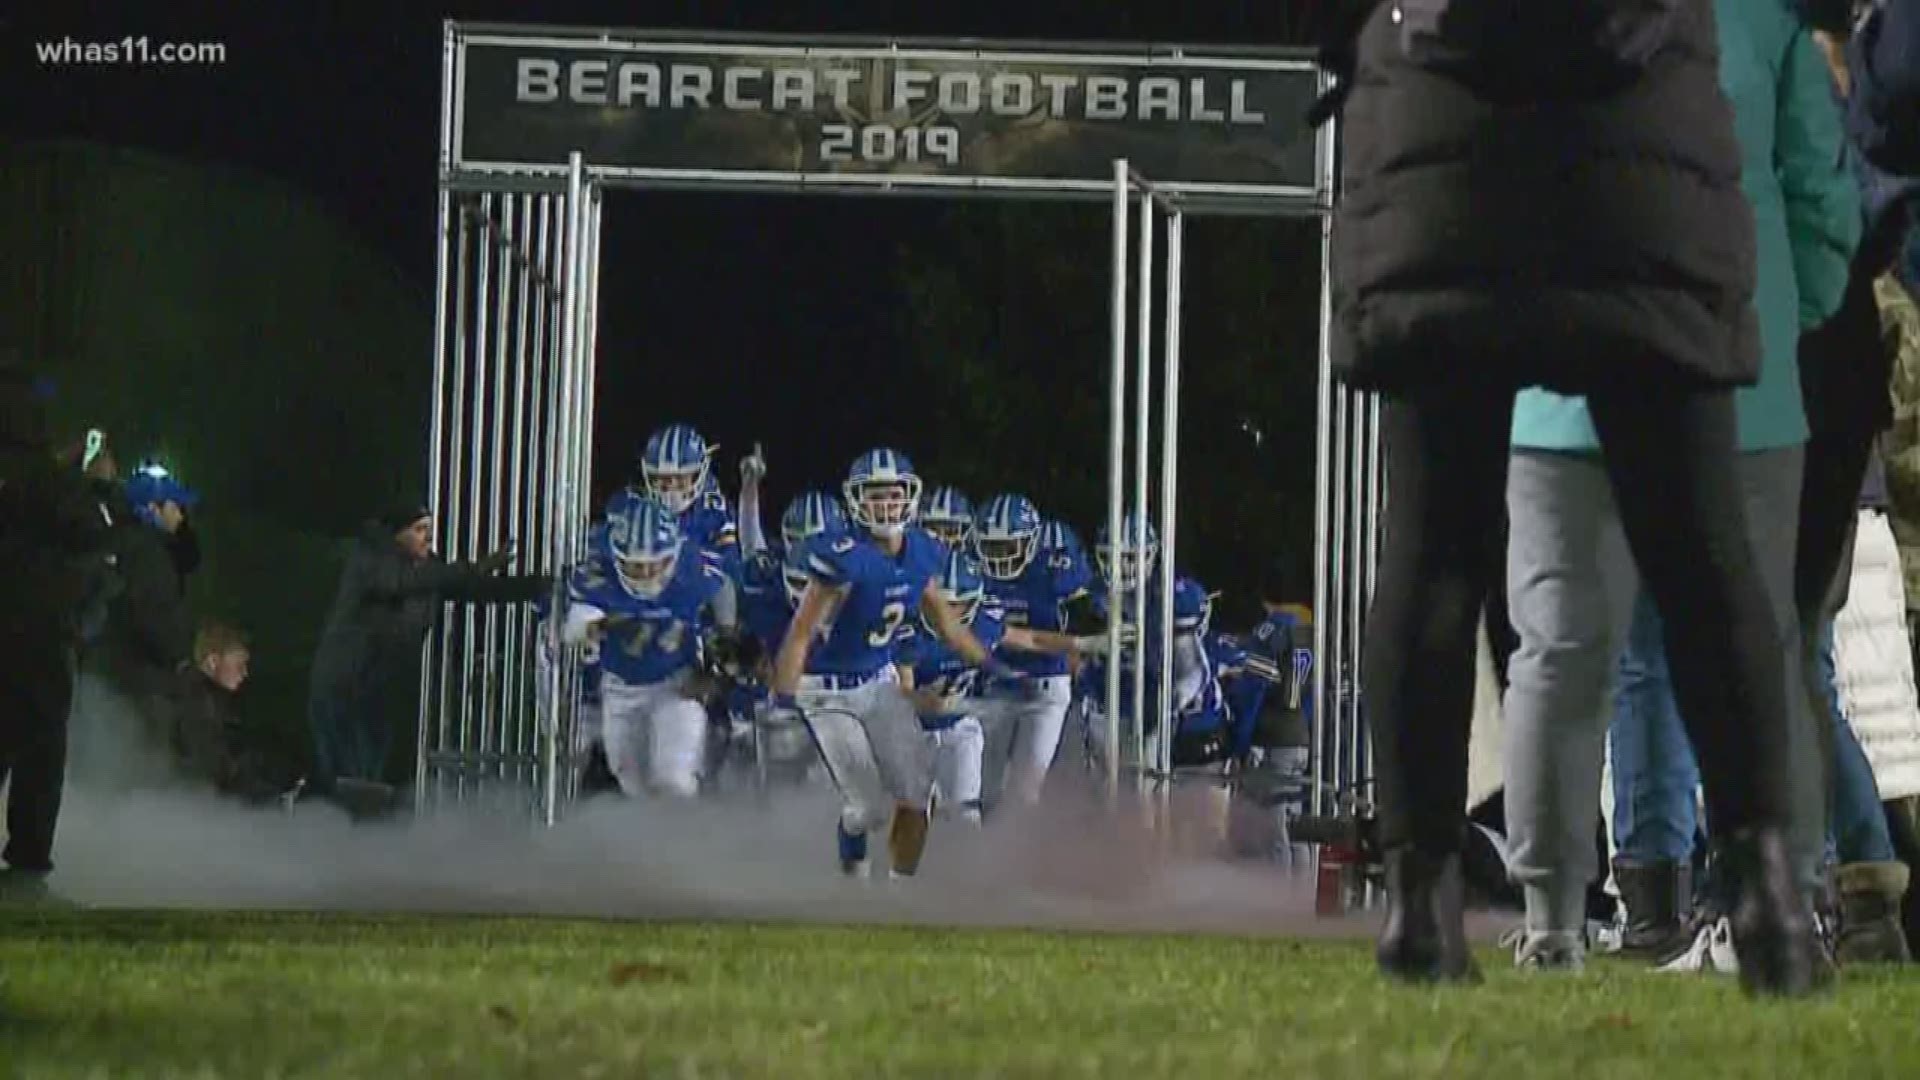 The Kentucky Country Day Bearcats are looking to stay undefeated this week against Crittenden Co. in the quarterfinals.